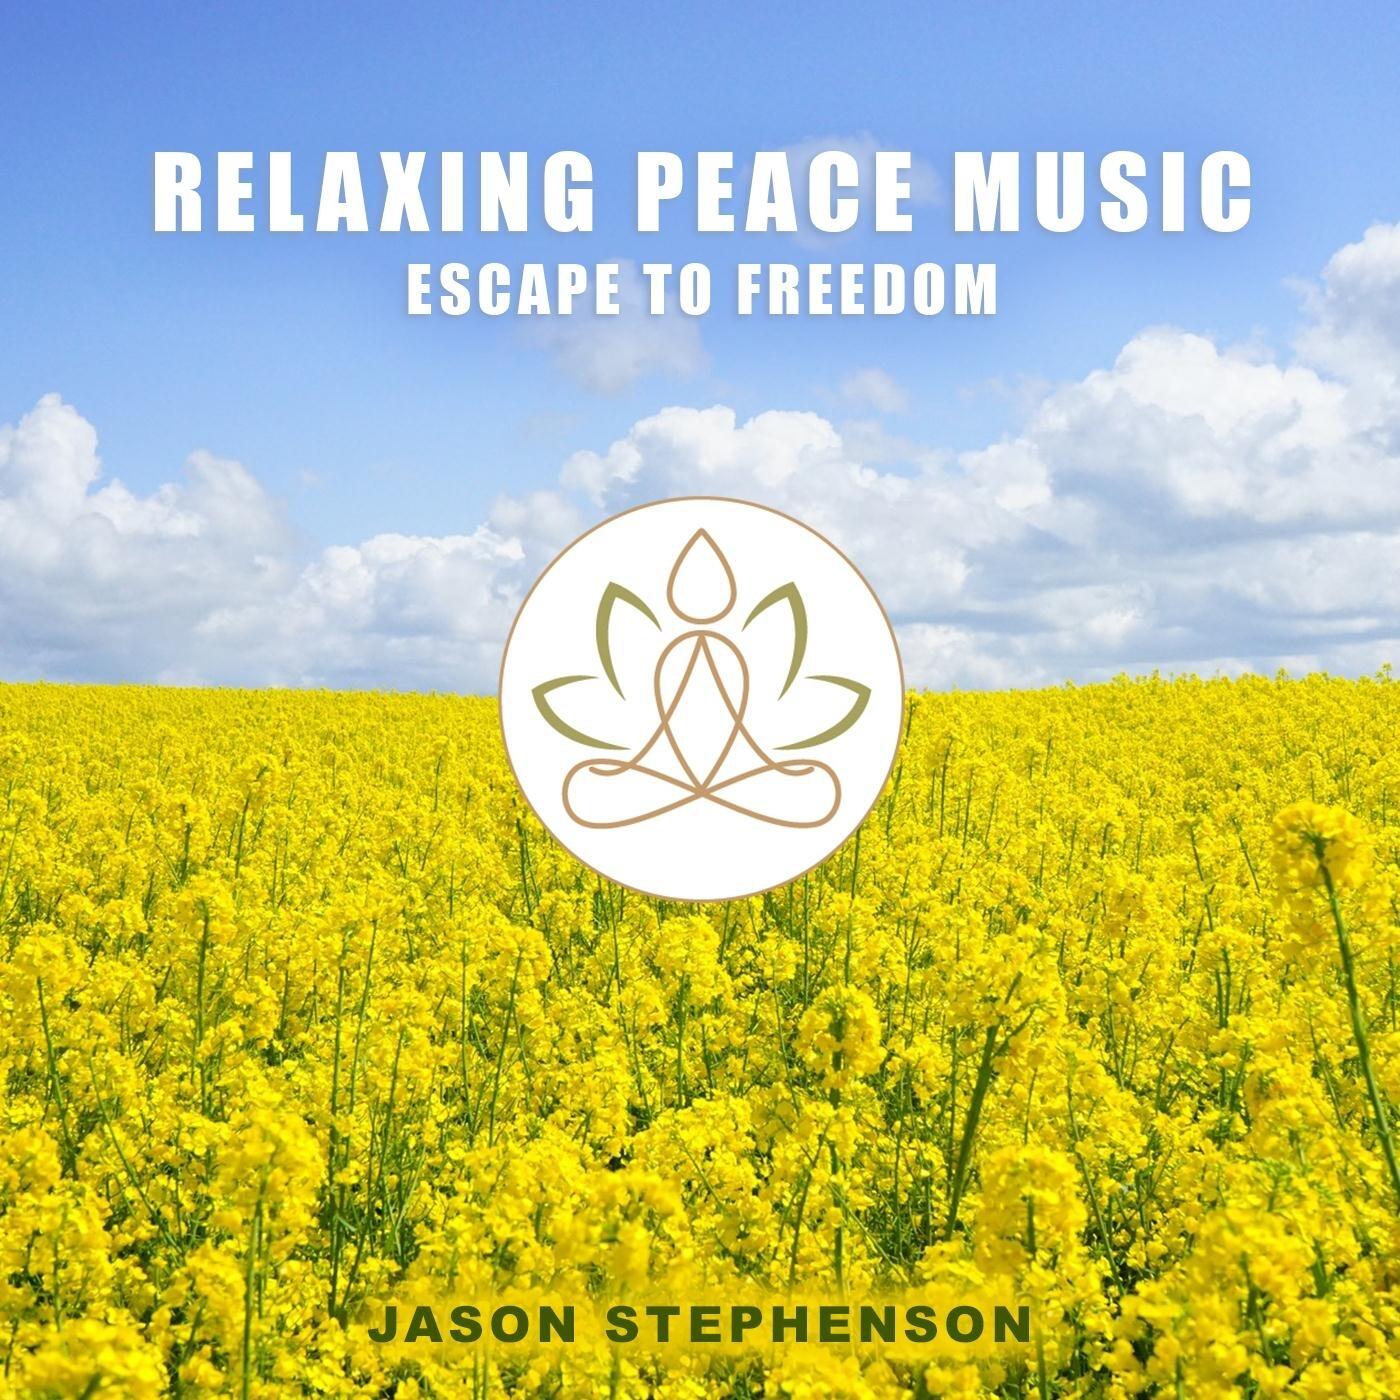 Jason Stephenson - Escape to Freedom (Relaxing Peace Music) | iHeart